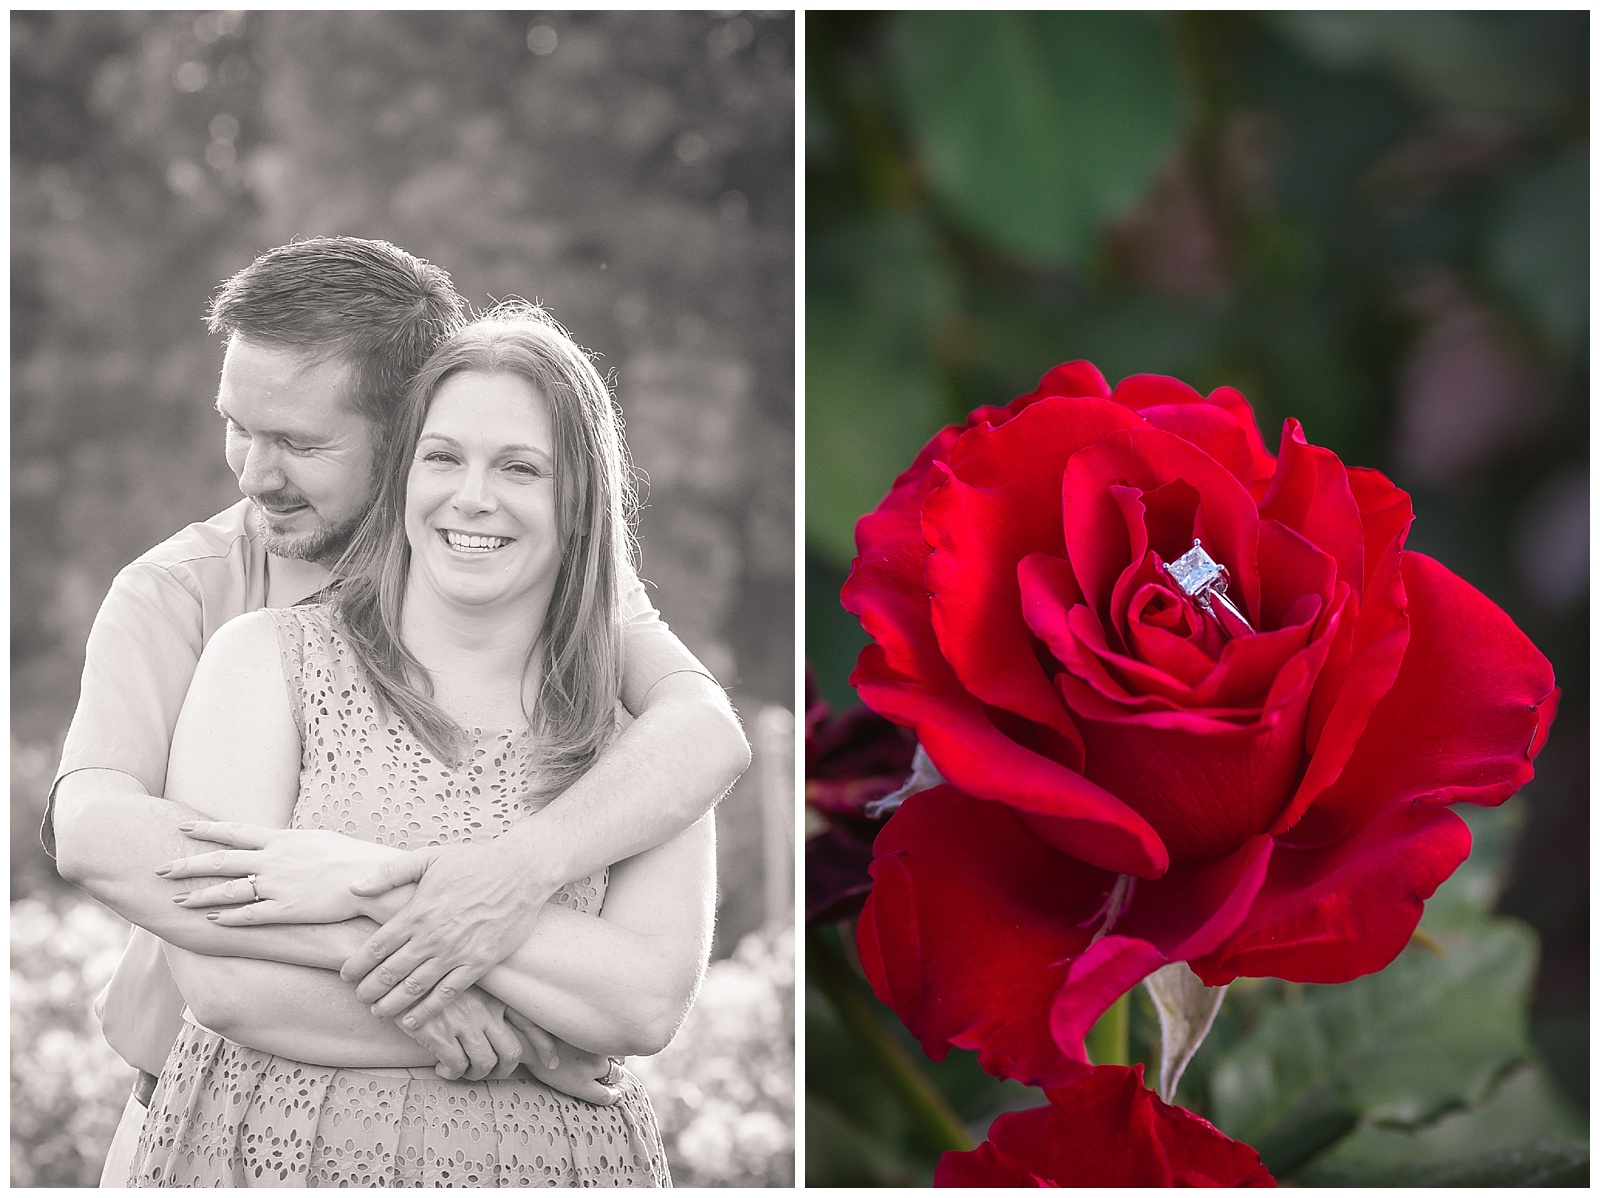 An engagement session at Gage Park in Topeka, Kansas.